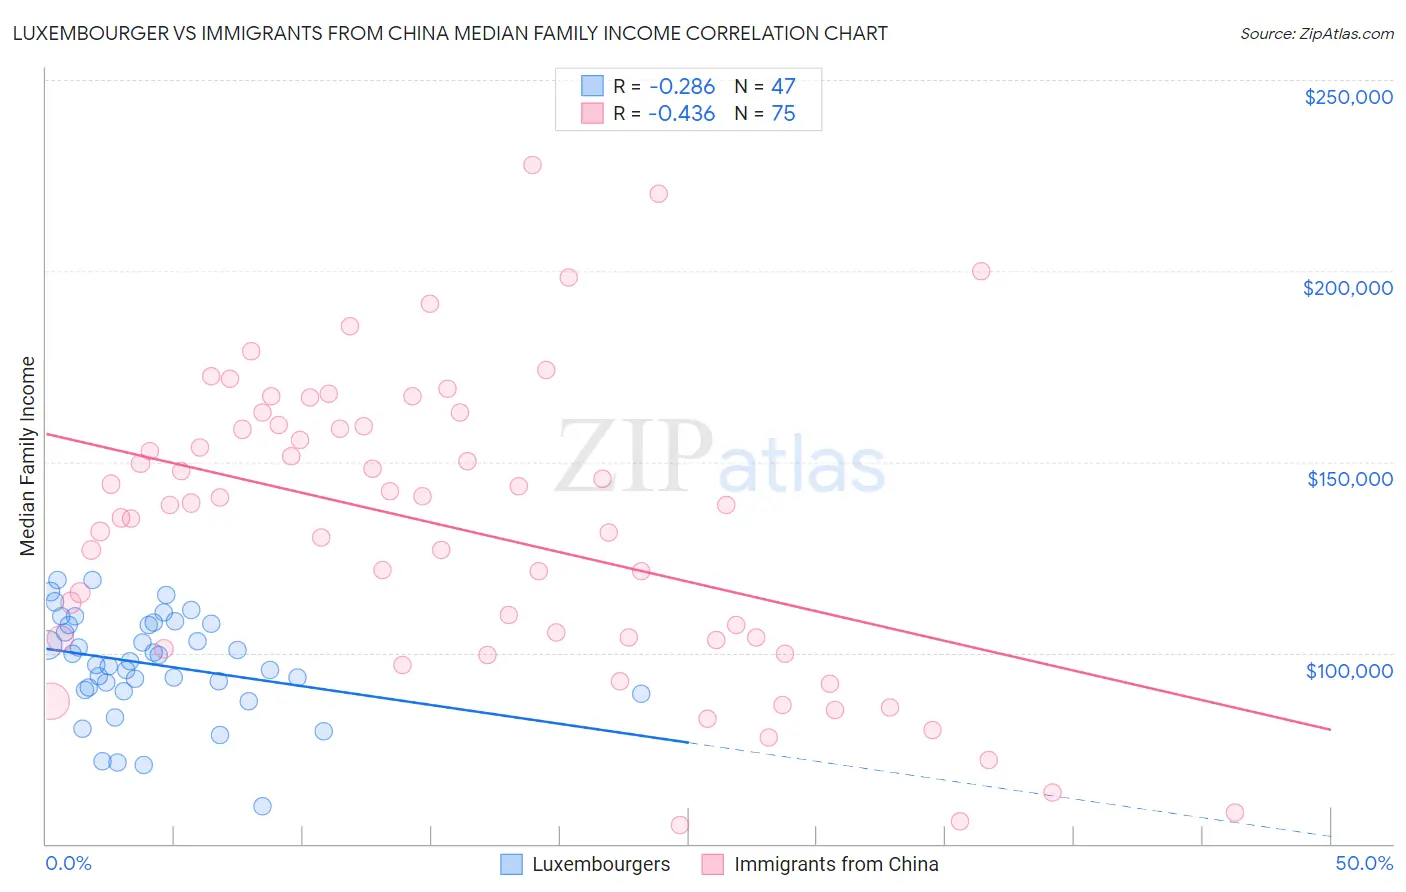 Luxembourger vs Immigrants from China Median Family Income